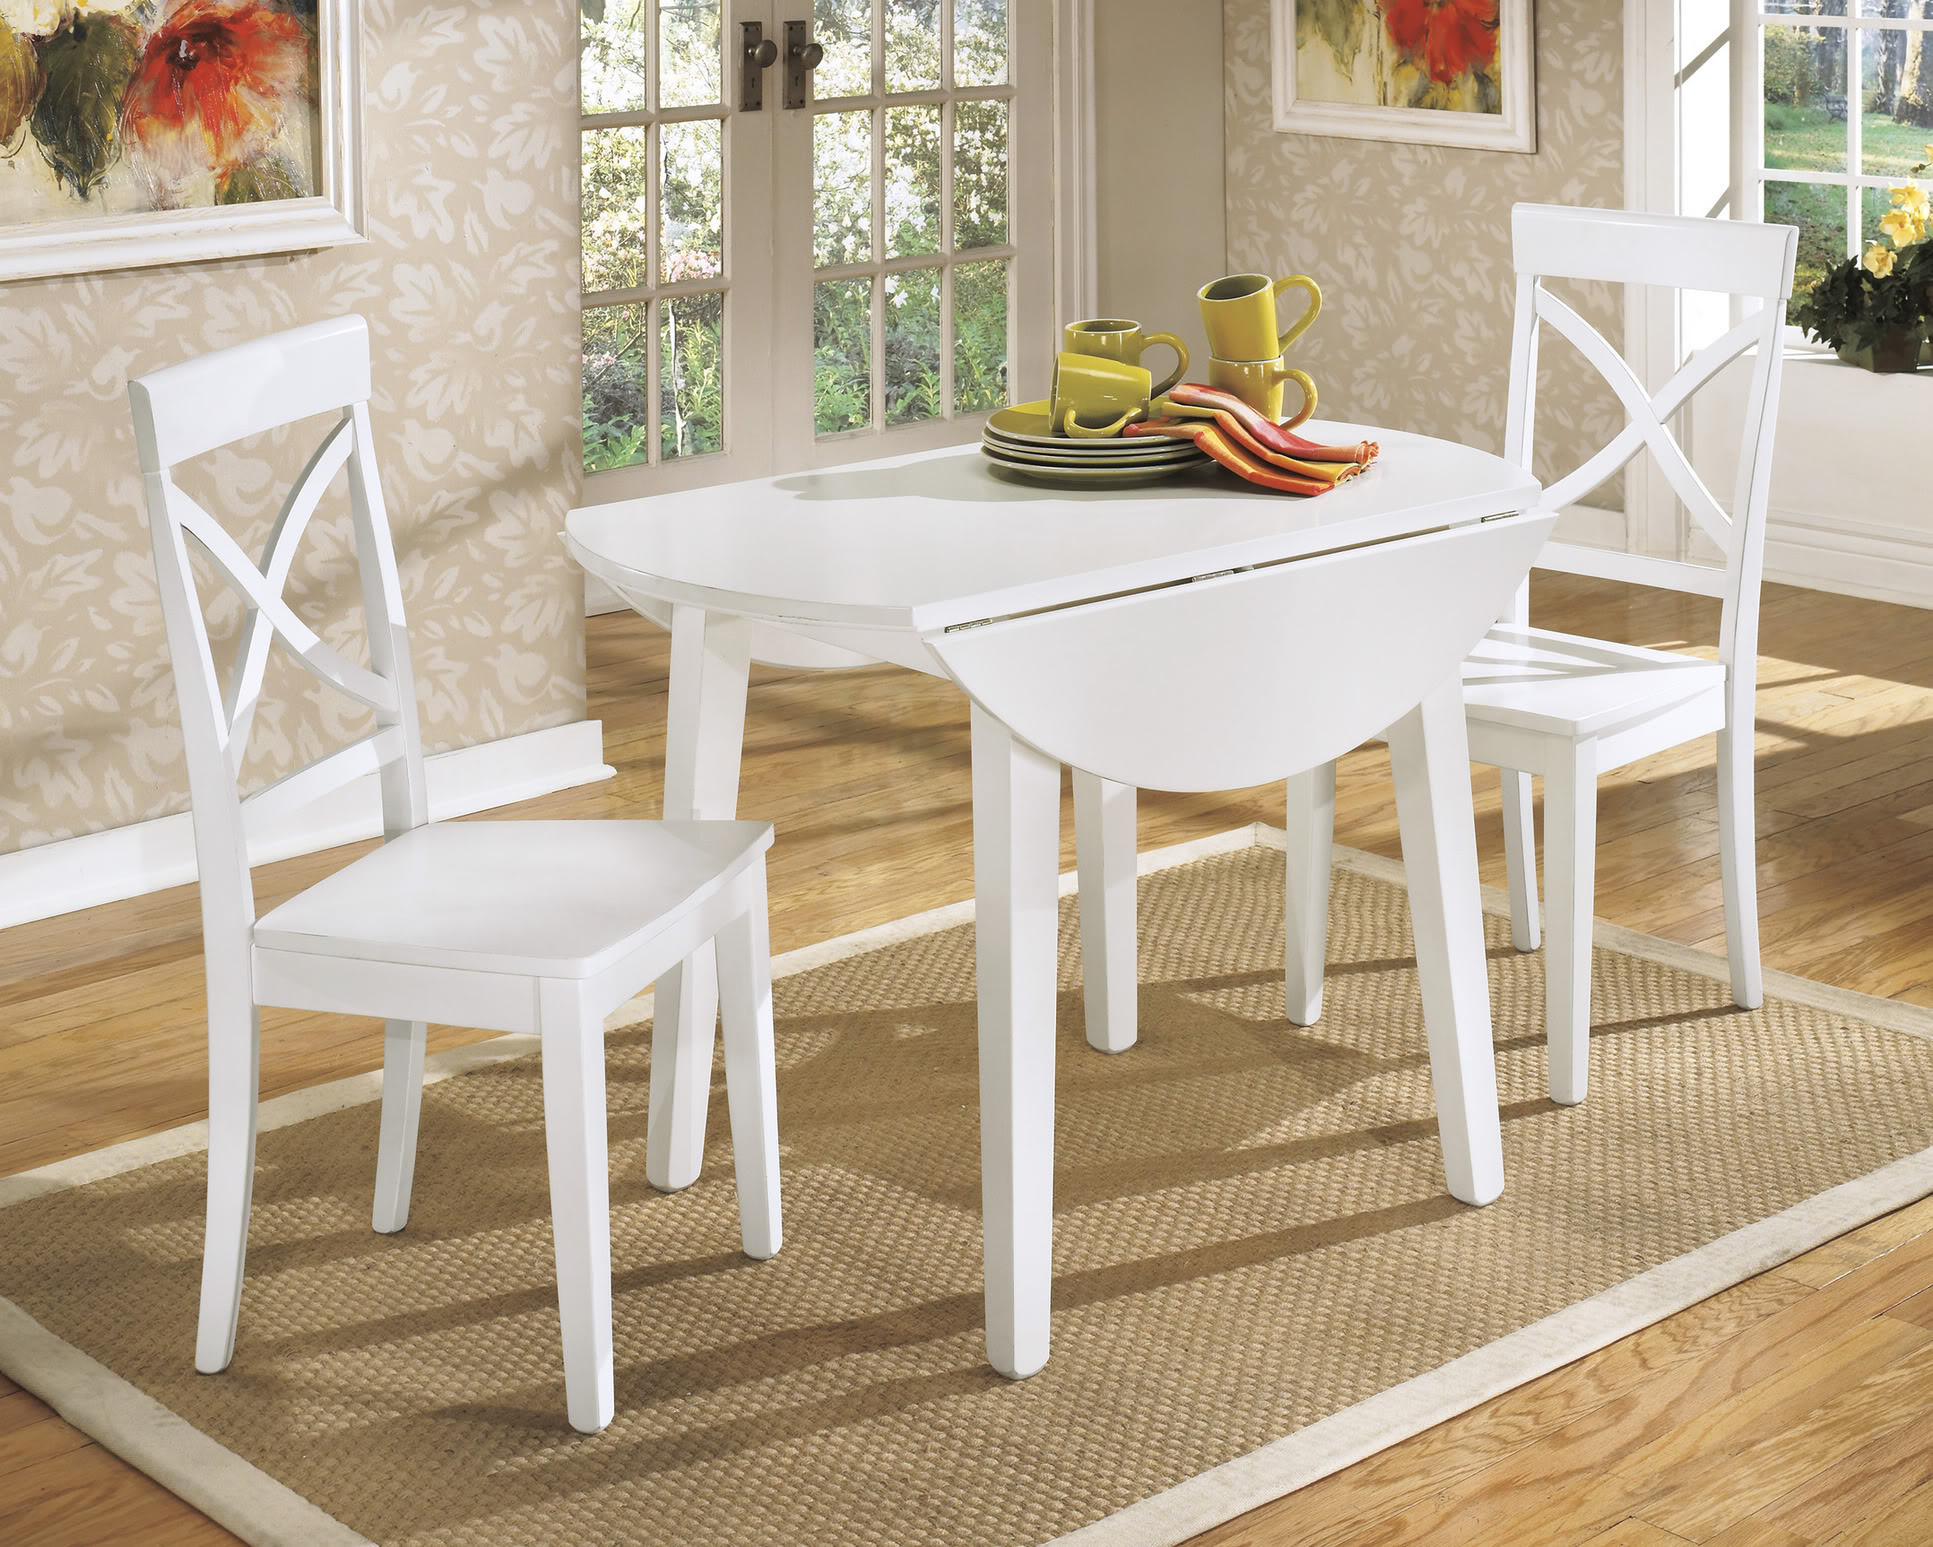 White Round Kitchen Table Sets
 White Round Kitchen Table and Chairs Design – HomesFeed